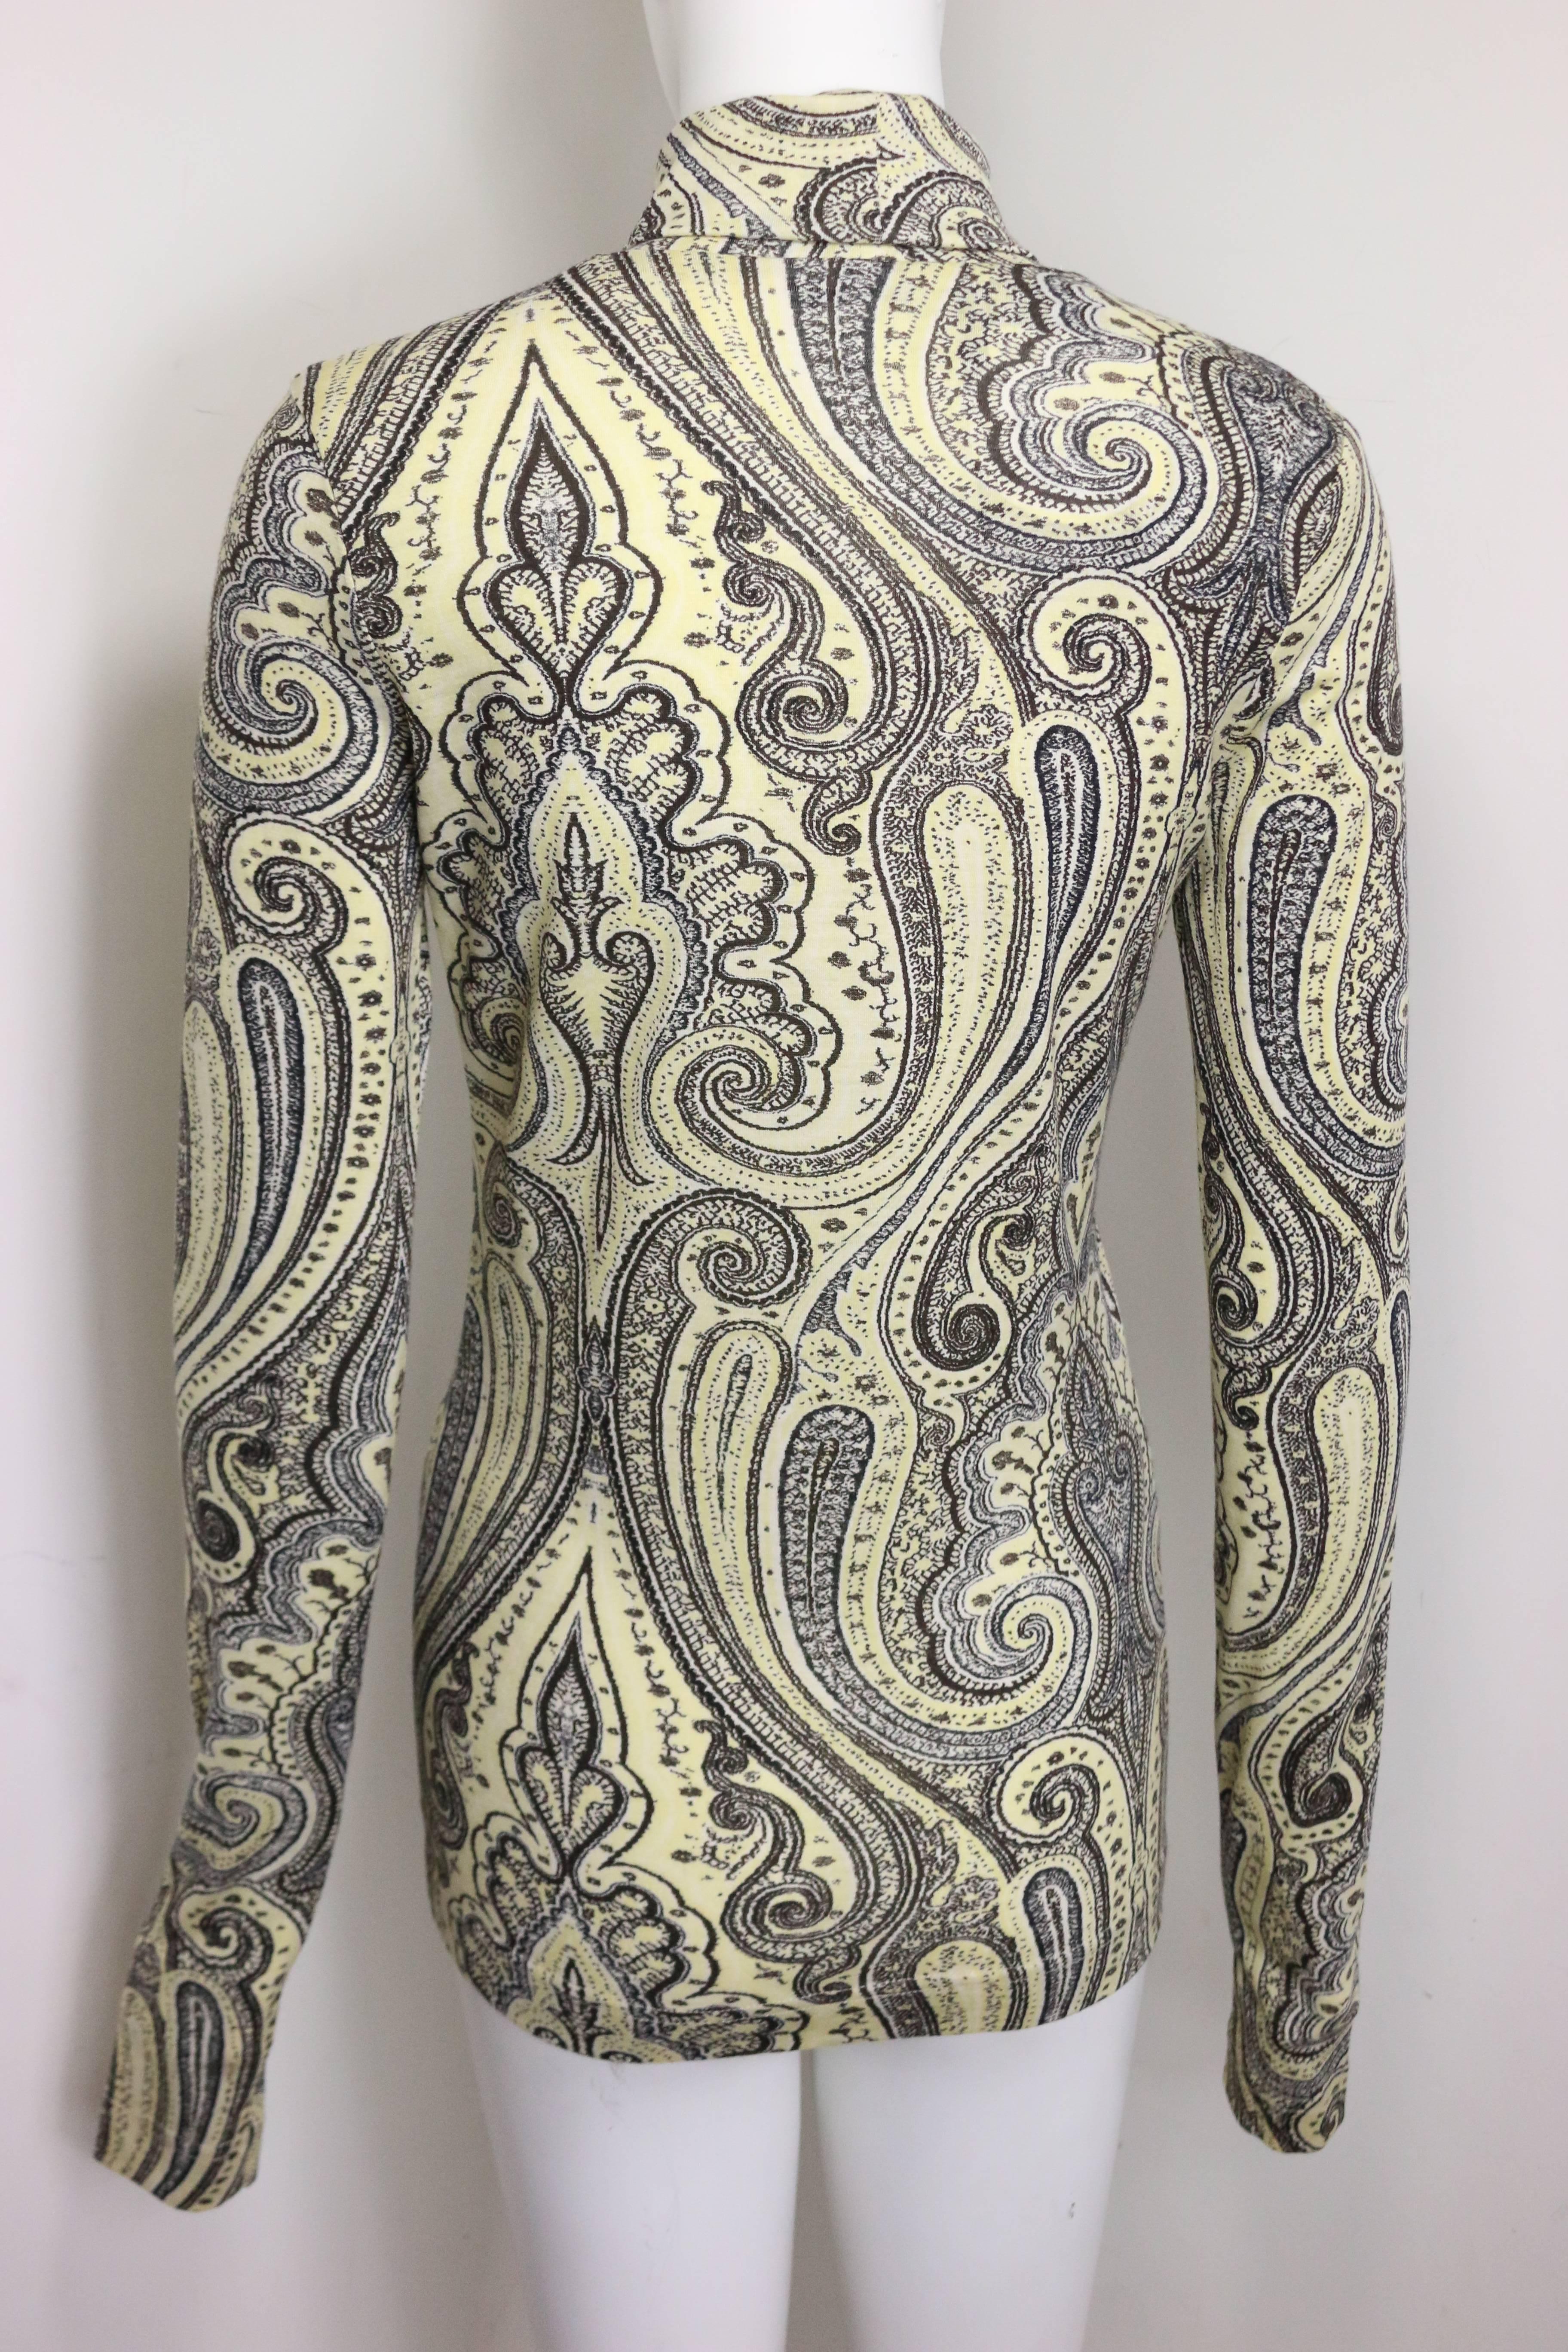 - Vintage 90s Dries Van Noten beige wool/cashmere roll neck top with asian inspired print. Dries Van Noten is famous for mixing prints, patterns and fabrics!!! This roll neck top is not an exception. The print is one of a kind and he did a great